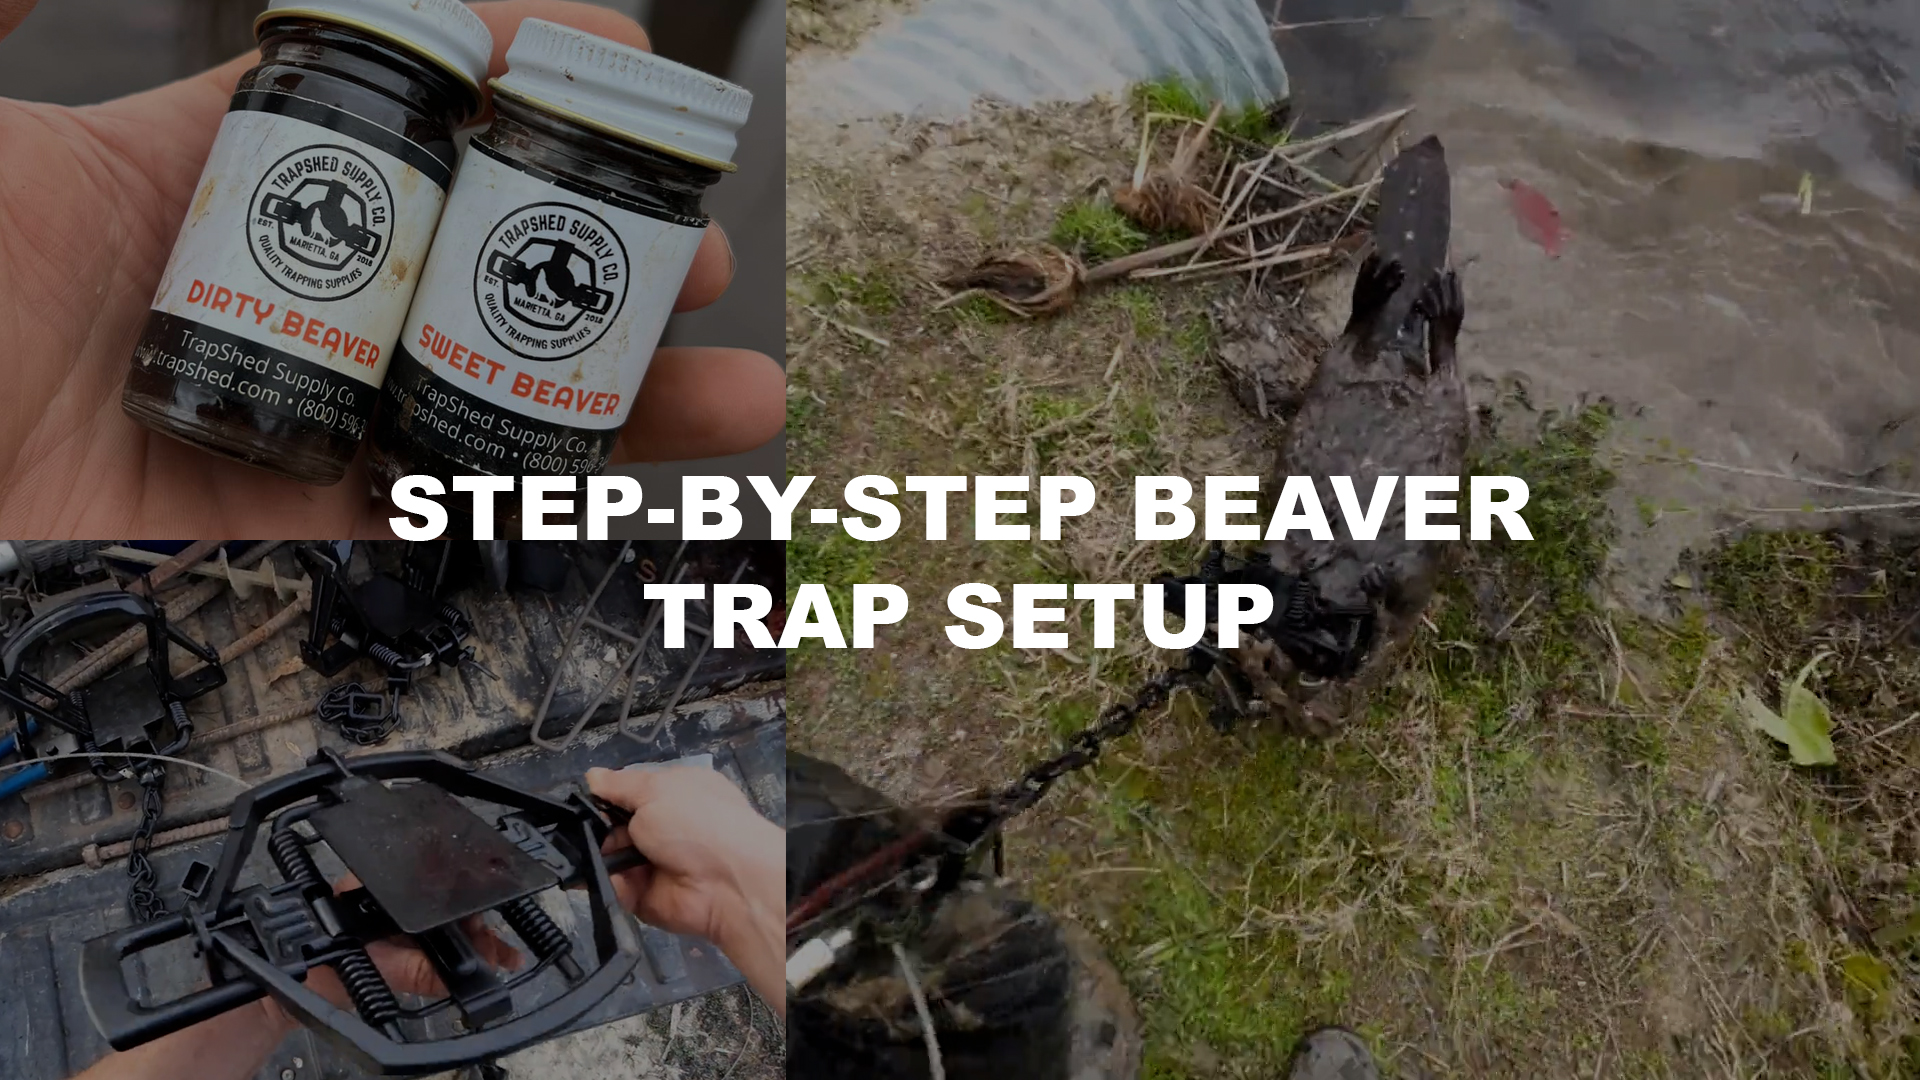 Step-by-Step Beaver Trapping - The Management Advantage